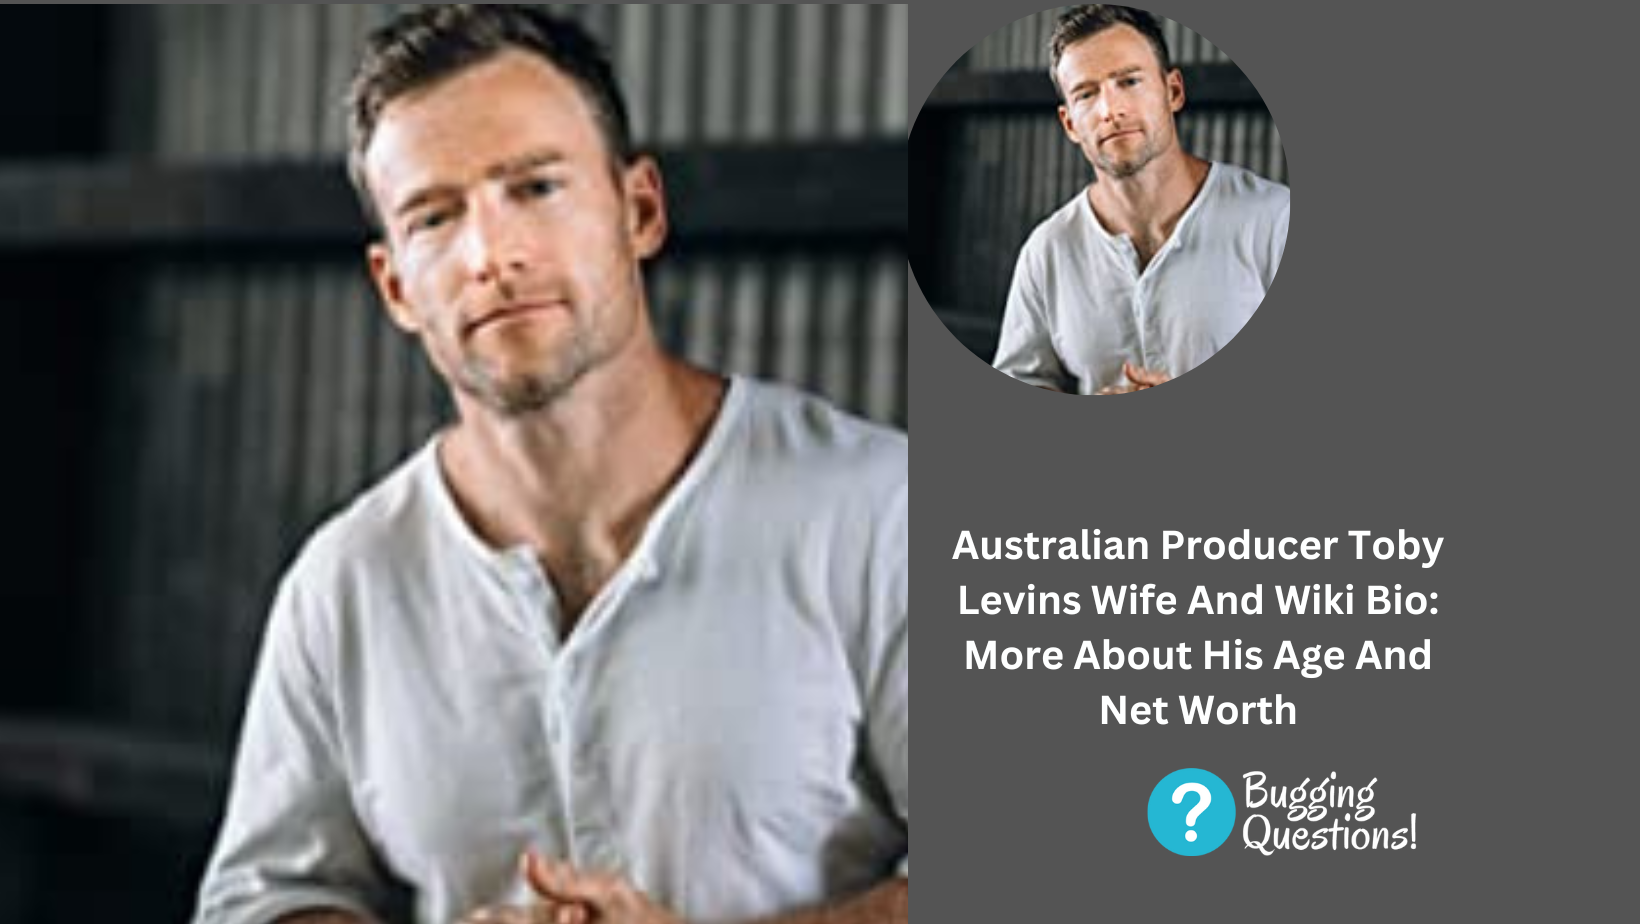 Australian Producer Toby Levins Wife And Wiki Bio